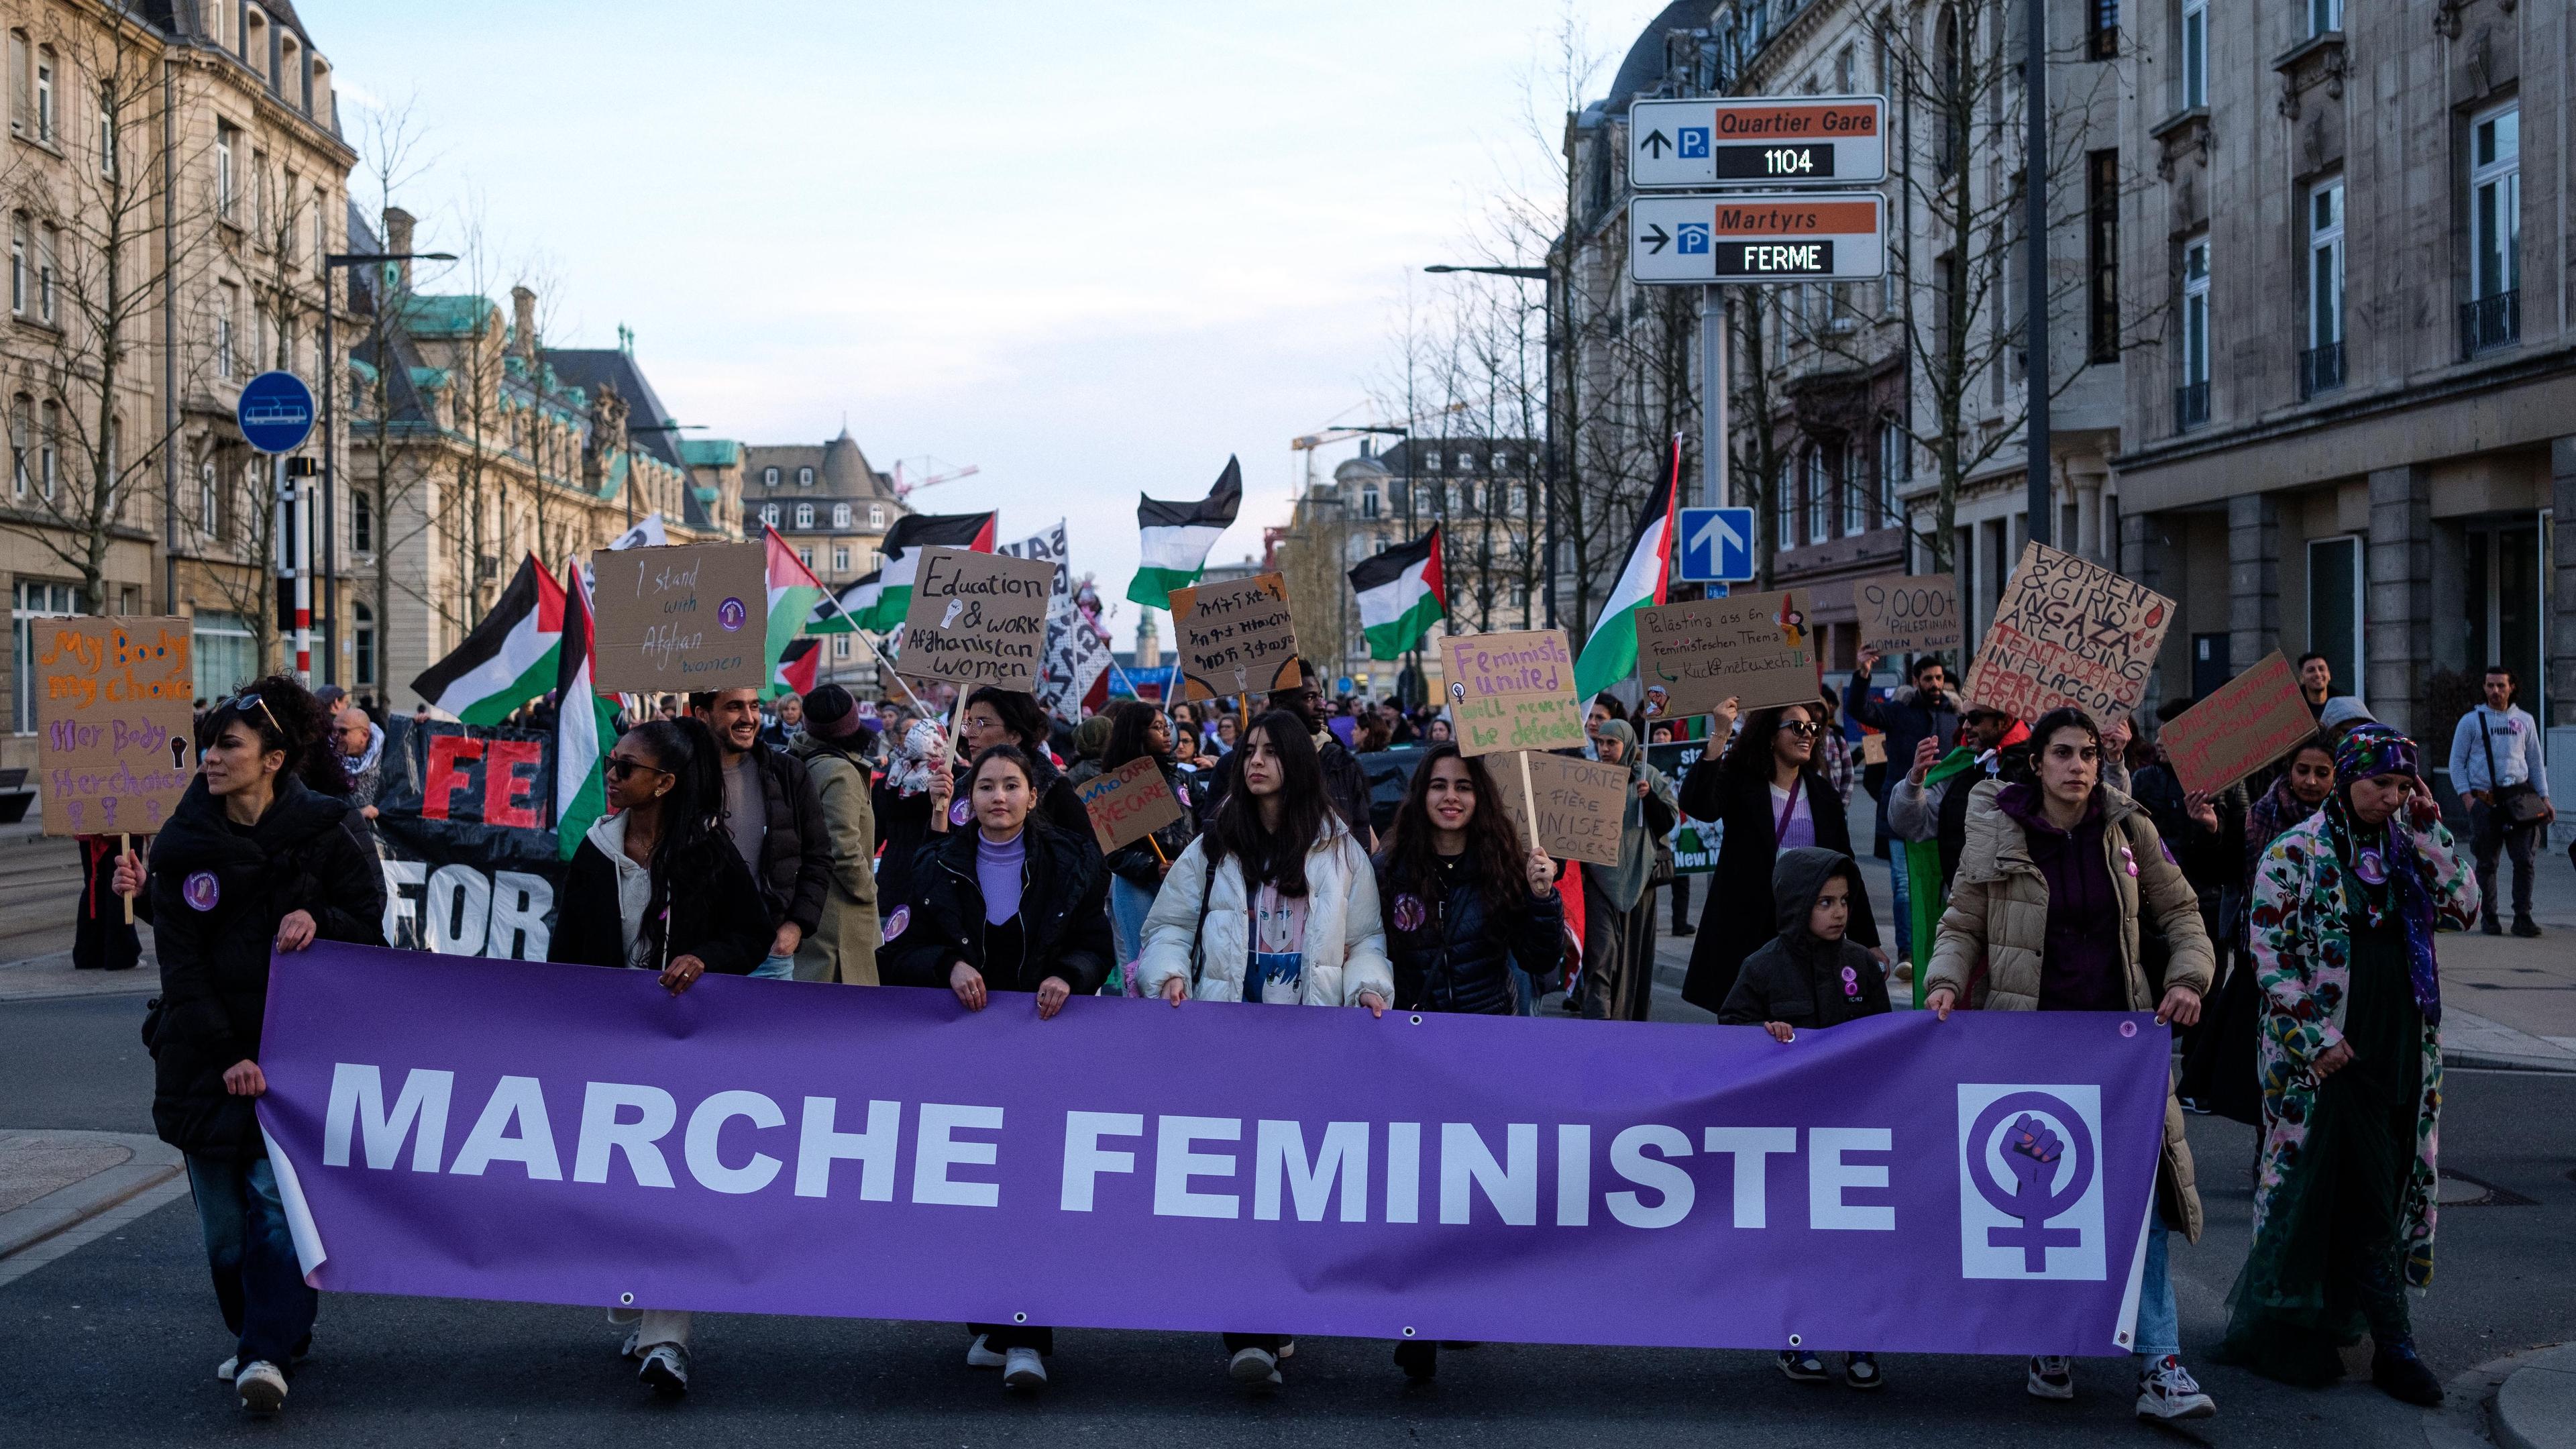 The annual women’s march in Luxembourg City attracted a thousand people